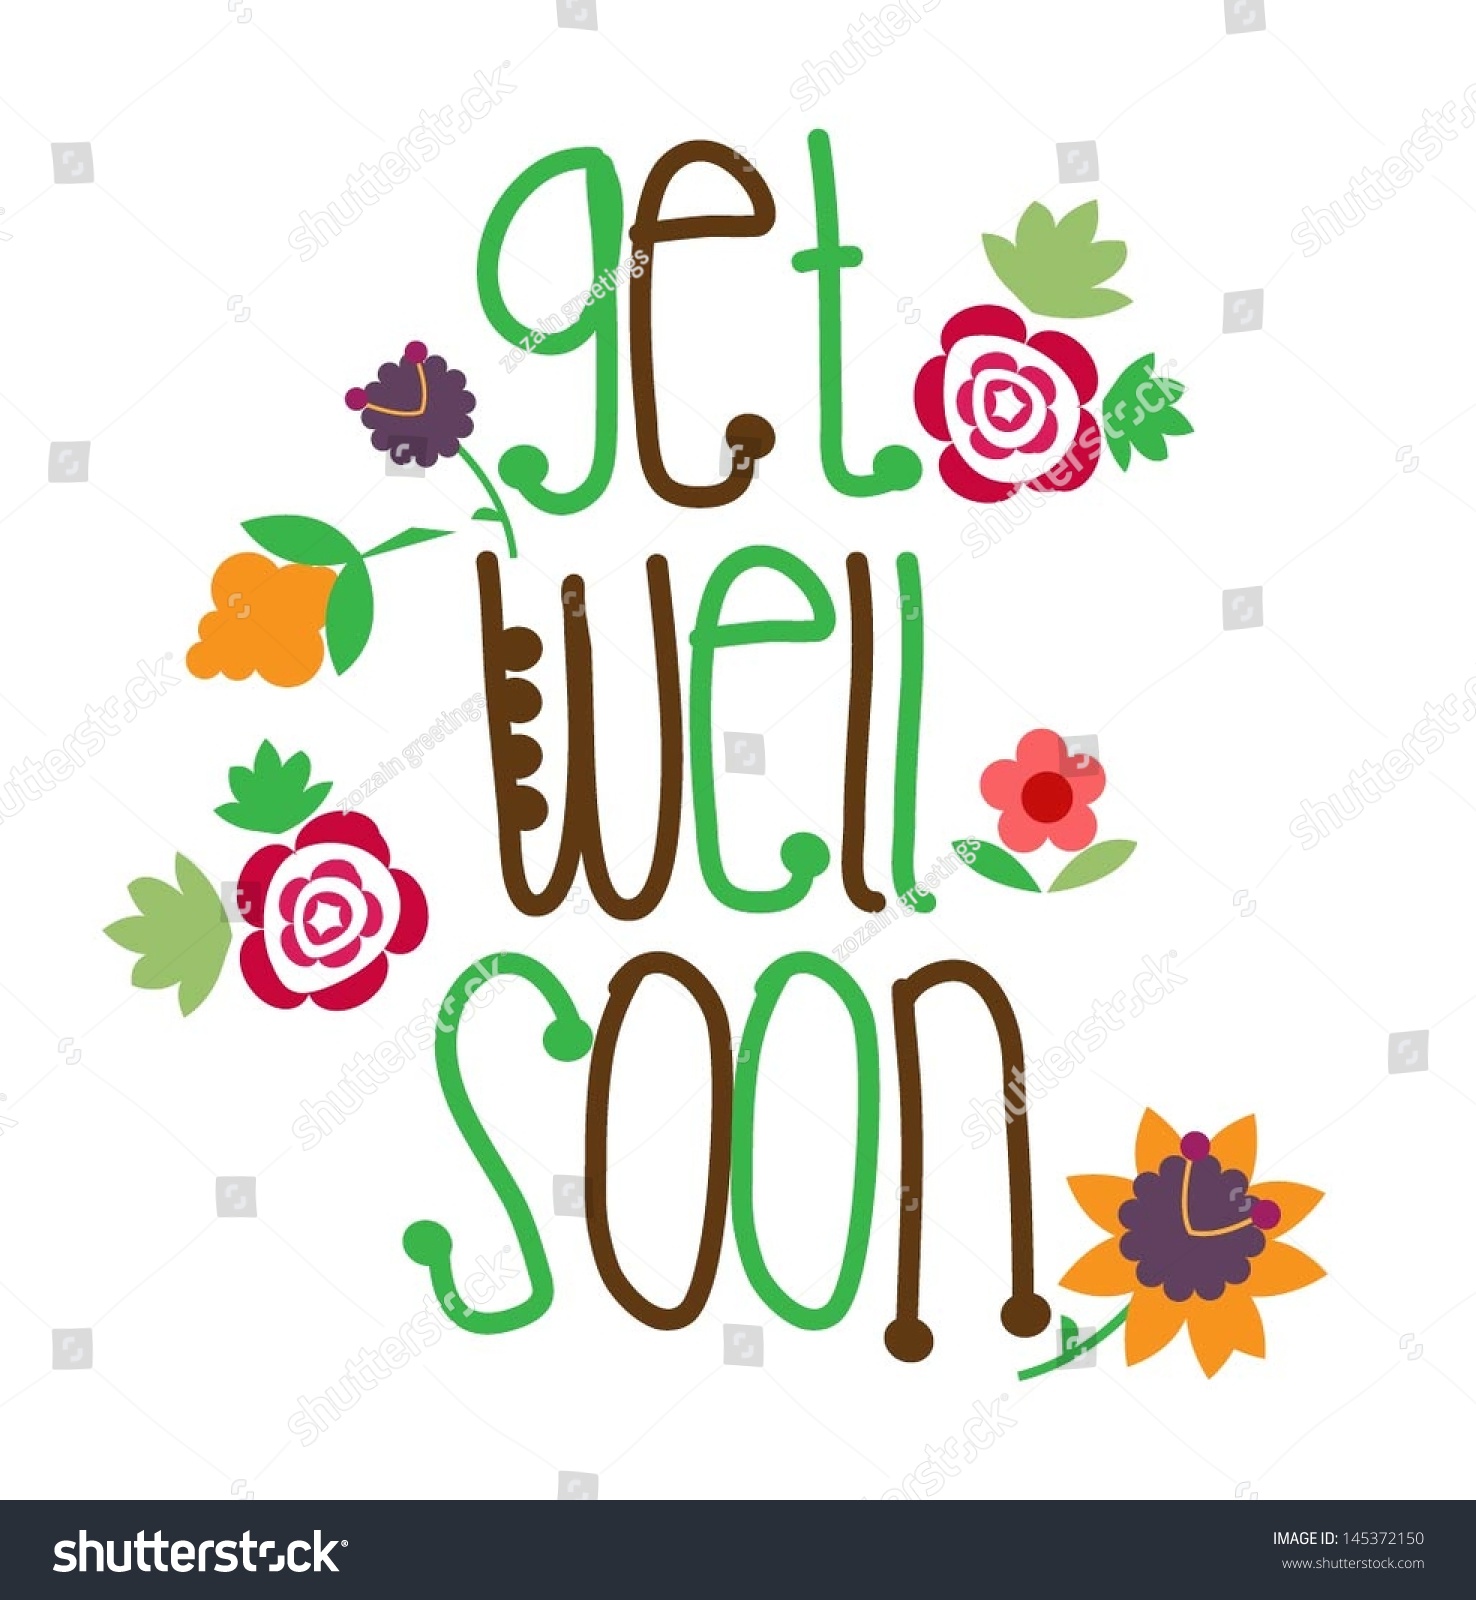 clip art get well wishes - photo #34